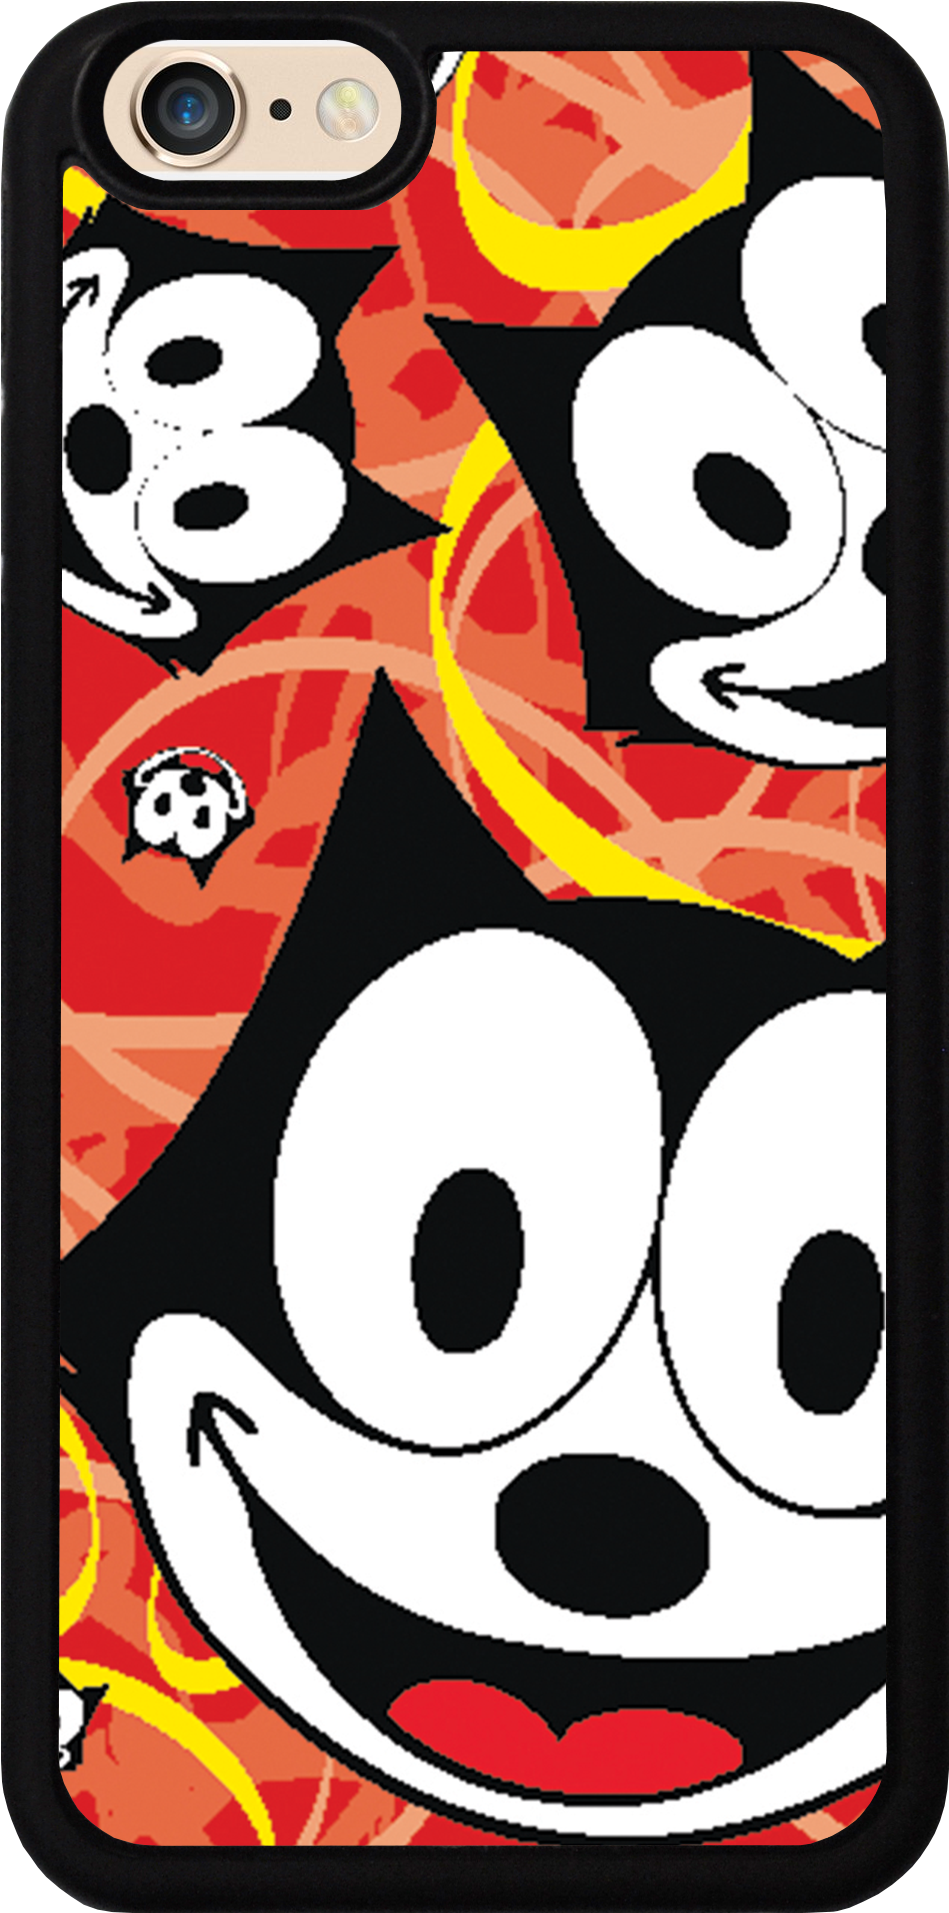 A Black Frame With A Black Border With White And Black Cartoon Characters